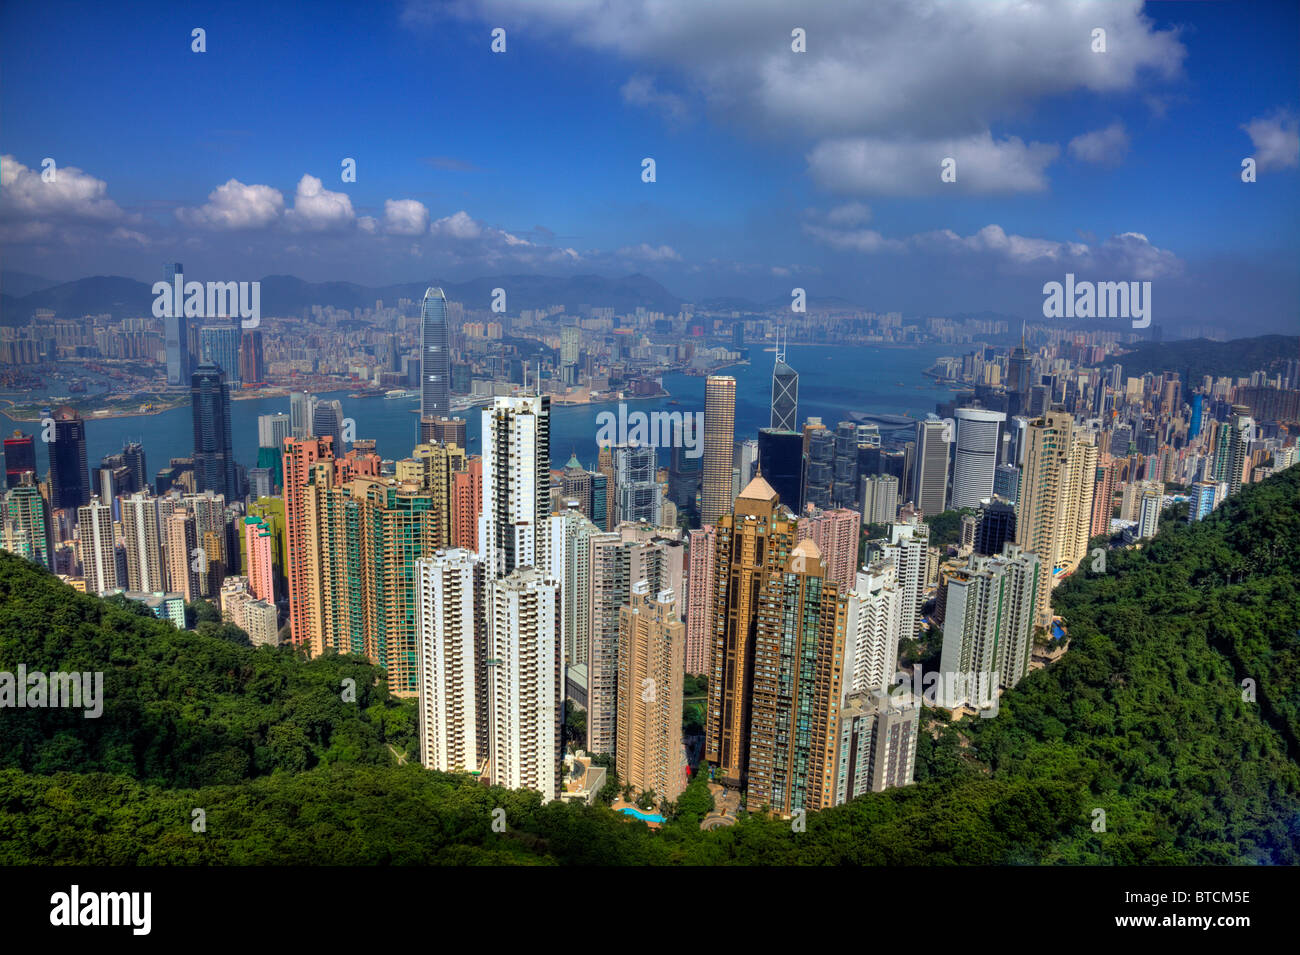 Hong Kong & Kowloon from the Peak classic skyline view including Victoria Harbour on nice clear day Stock Photo